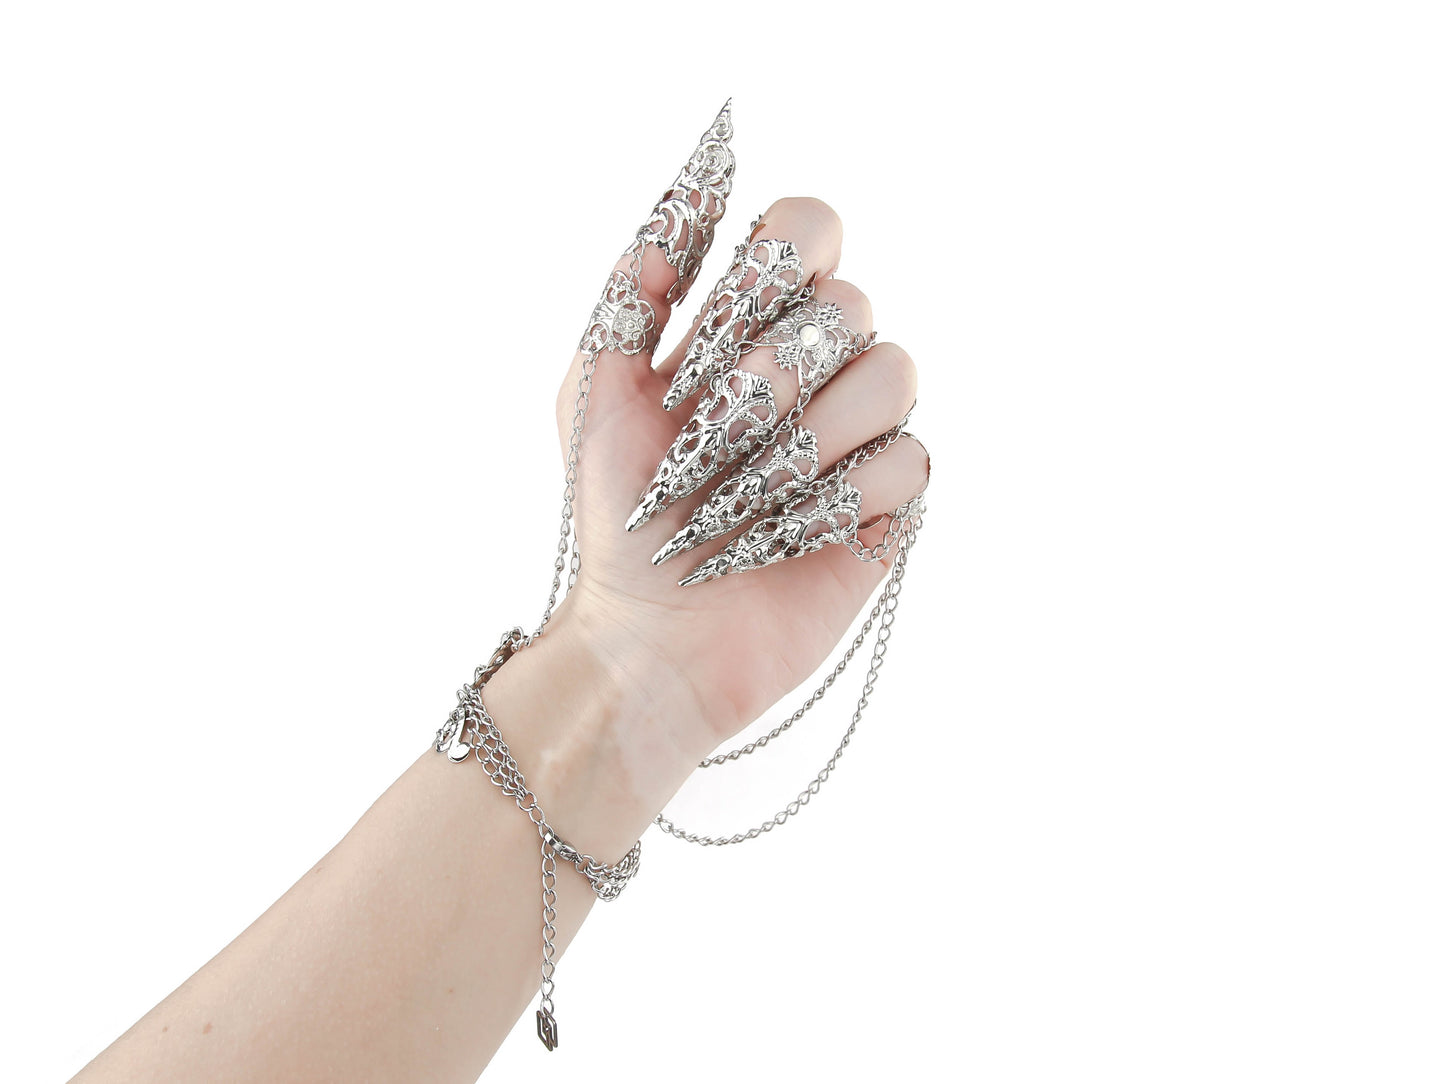 A hand dons a Myril Jewels metal glove with elaborate silver finger claw rings, perfect for a dark avant-garde aesthetic. This statement piece is ideal for those who love gothic-chic jewelry, making it a unique accessory for Halloween, witchcore fashion, or as a bold addition to festival and rave outfits.